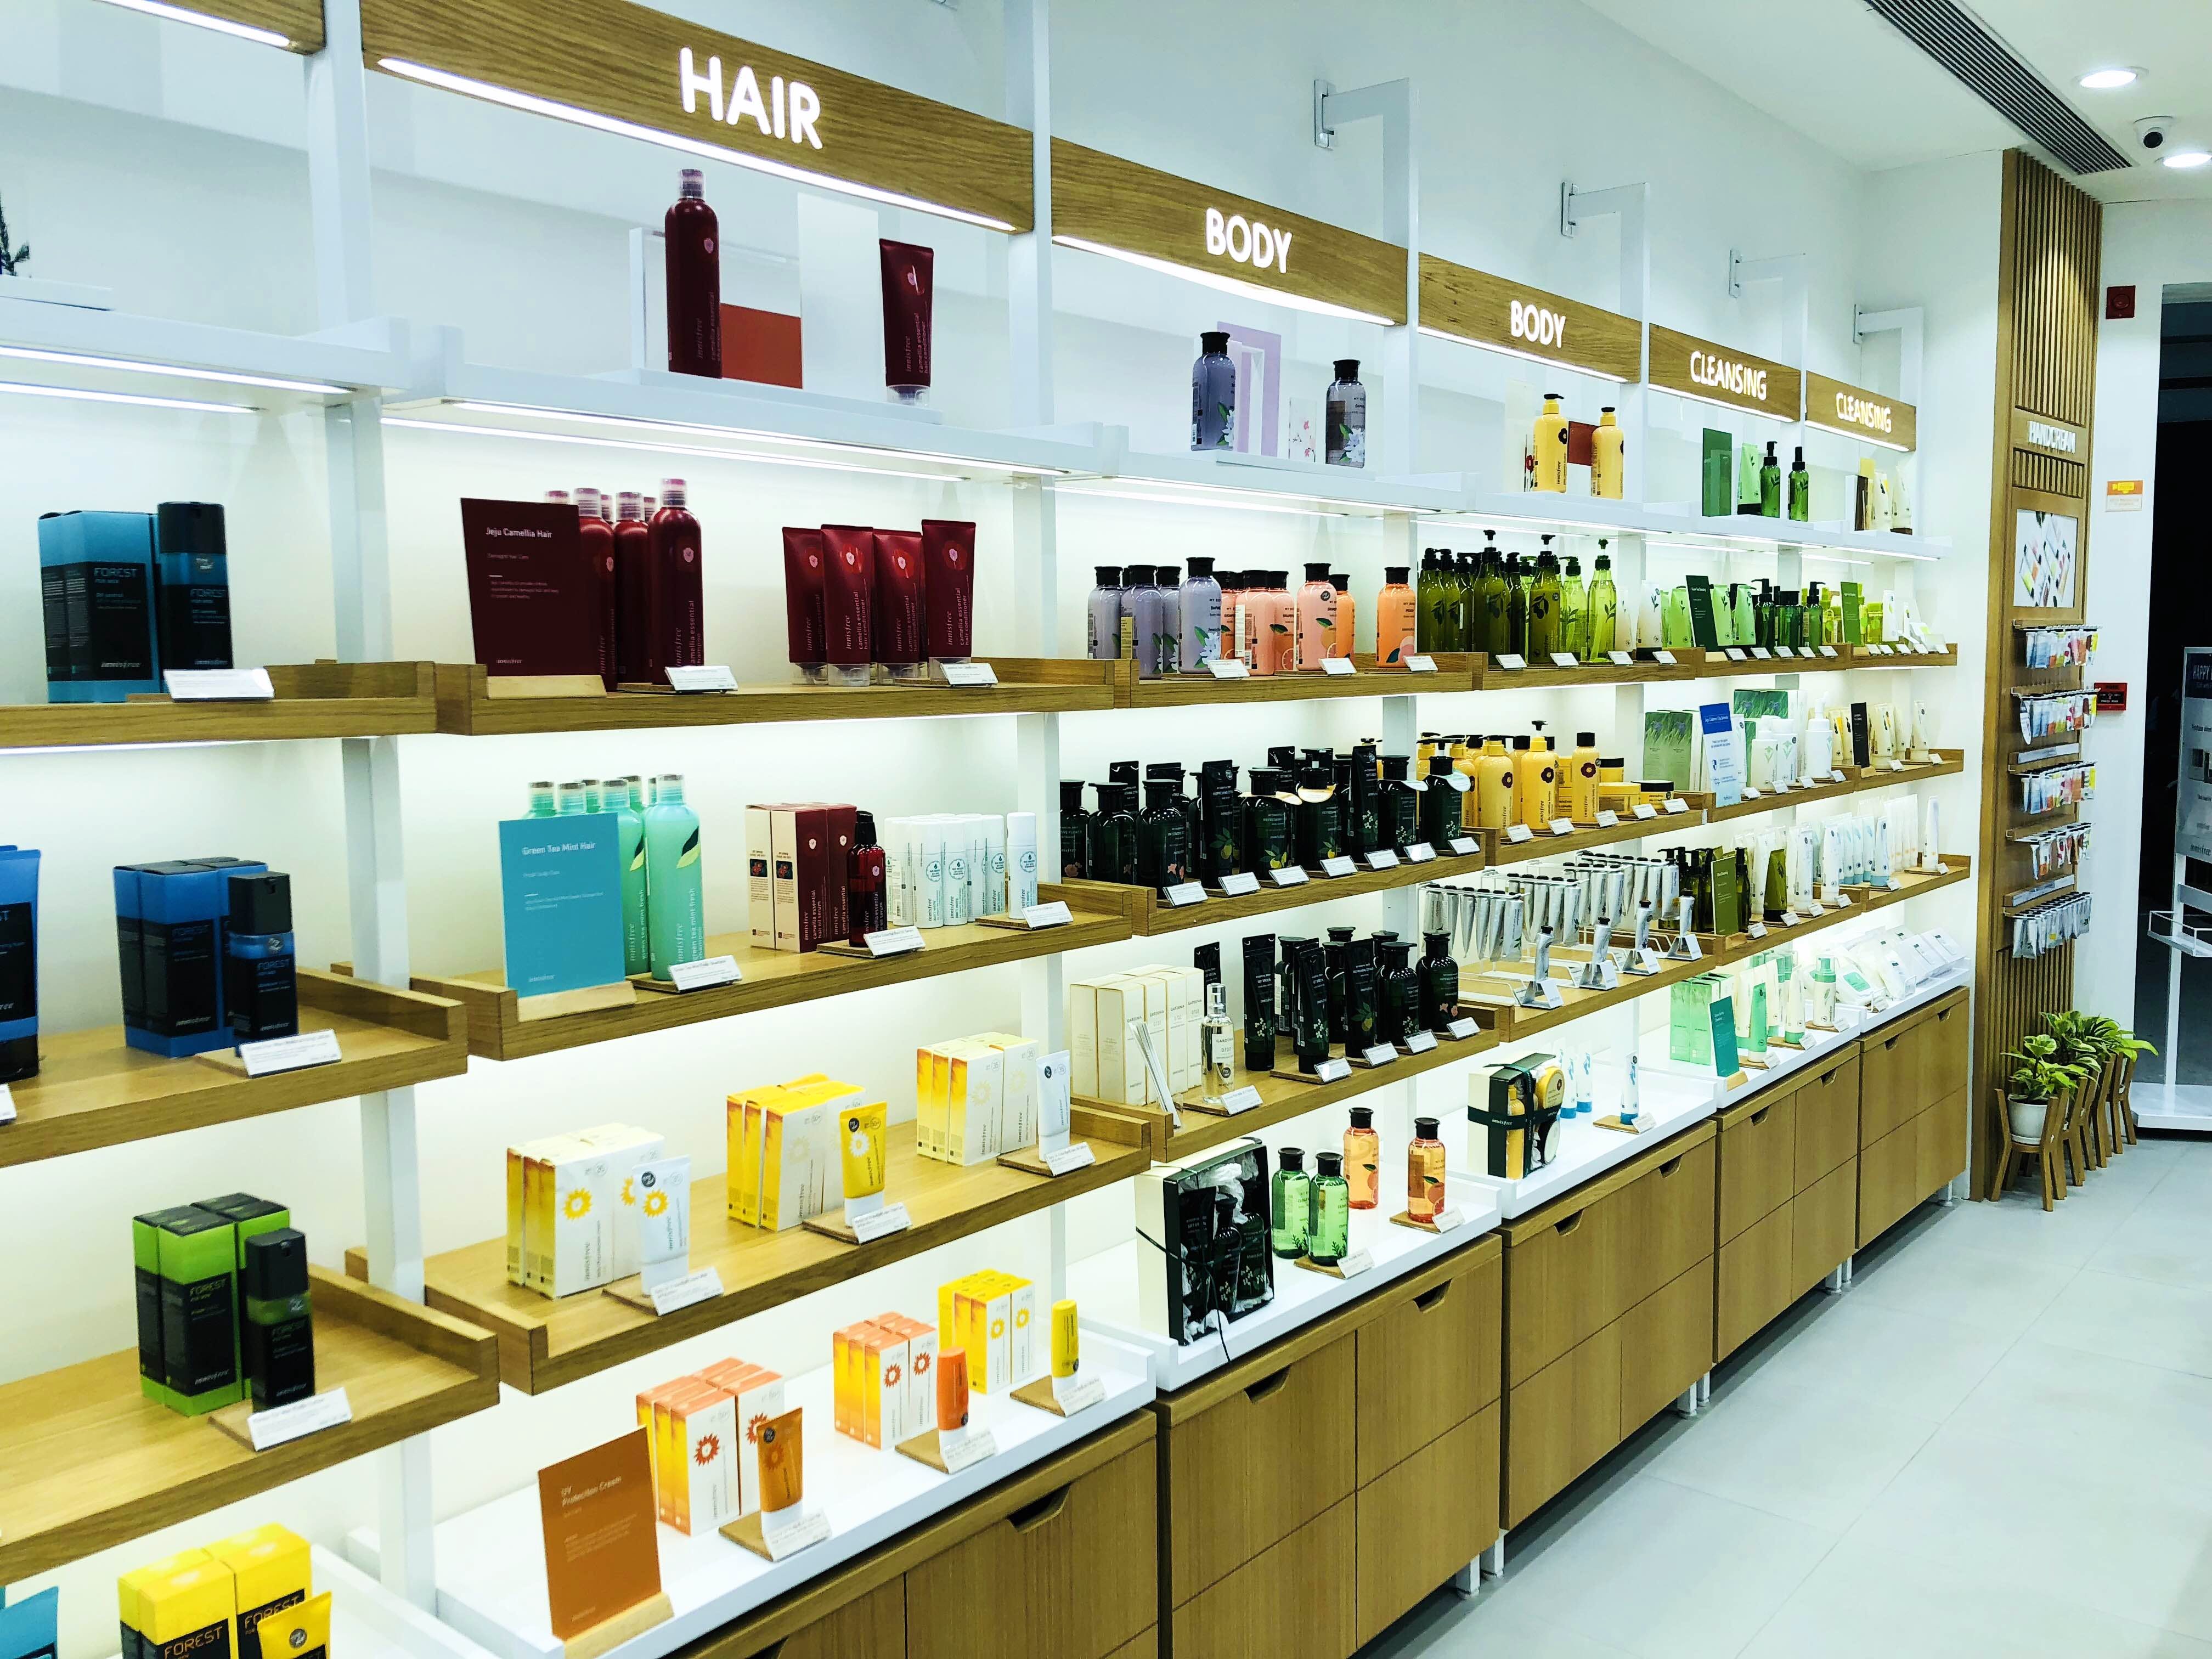 Product,Outlet store,Building,Retail,Footwear,Display case,Interior design,Shelf,Furniture